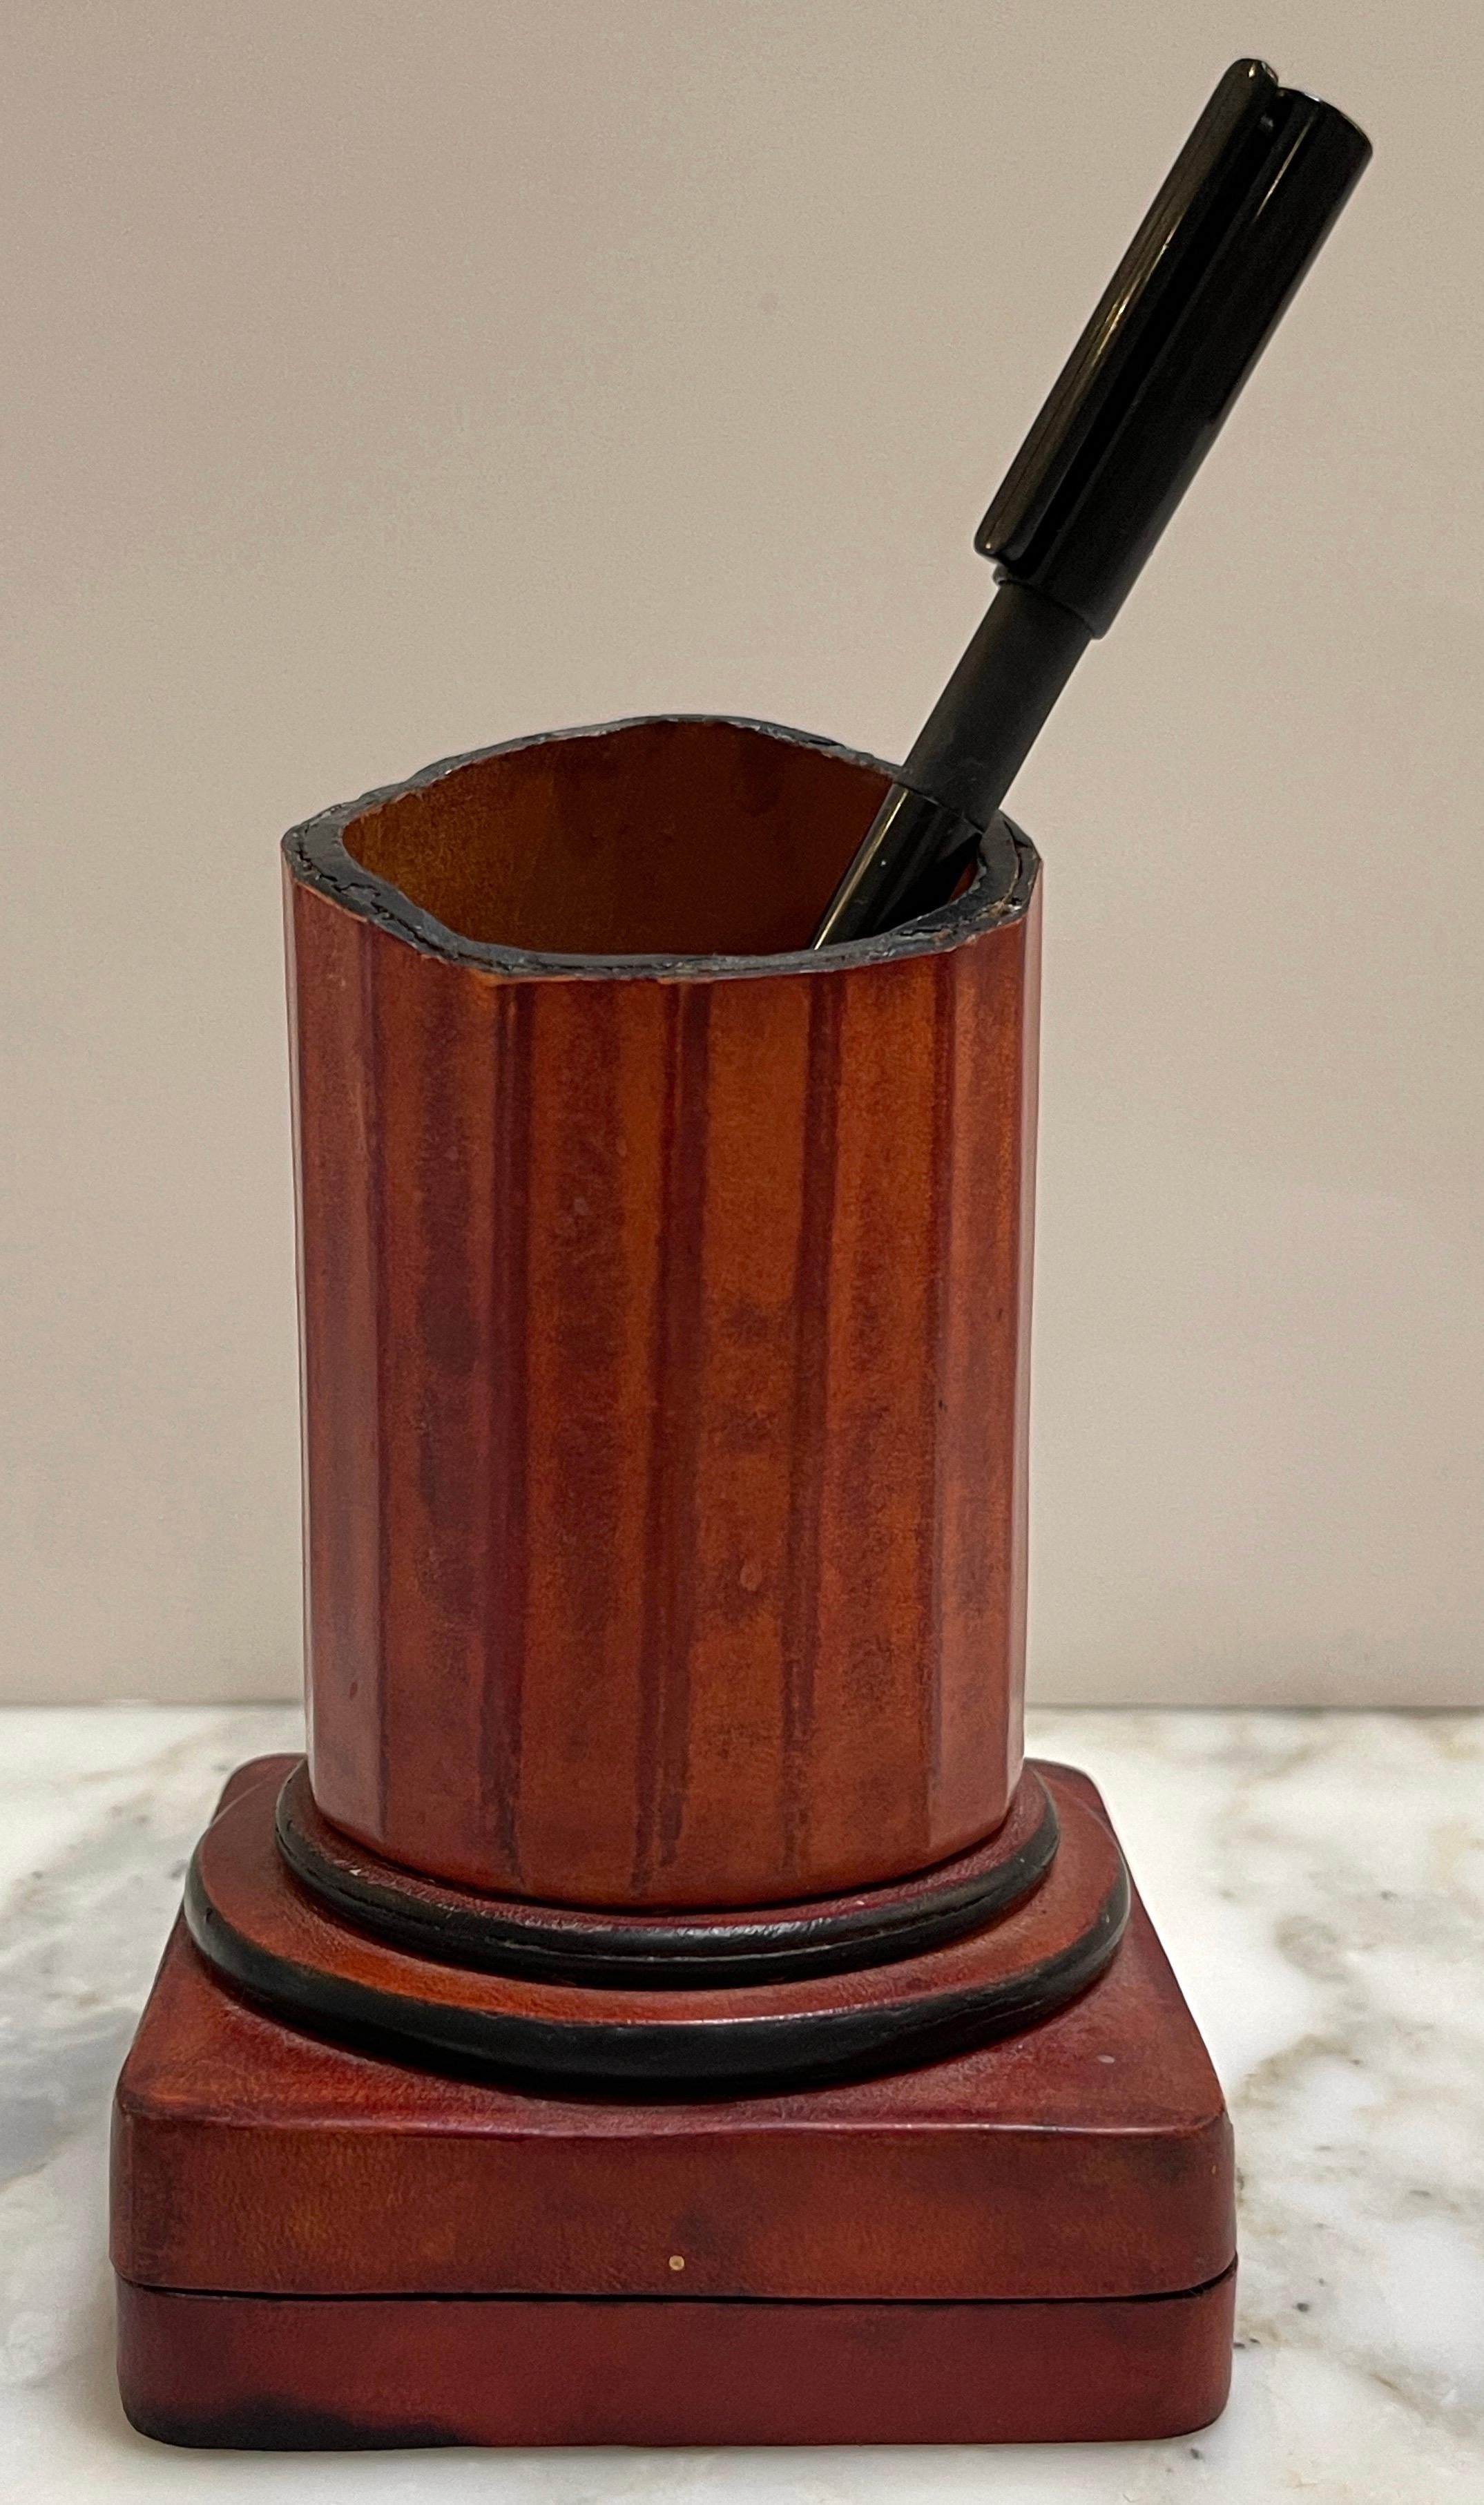 1960s Italian Grand Tour Style Leather & Burlwood Column Motif Pen Stand/Box 
Italy, 1960s
This Italian Grand Tour style pen stand/box from the 1960s is a unique and beautifully crafted desk accessory. It features a design reminiscent of a fluted